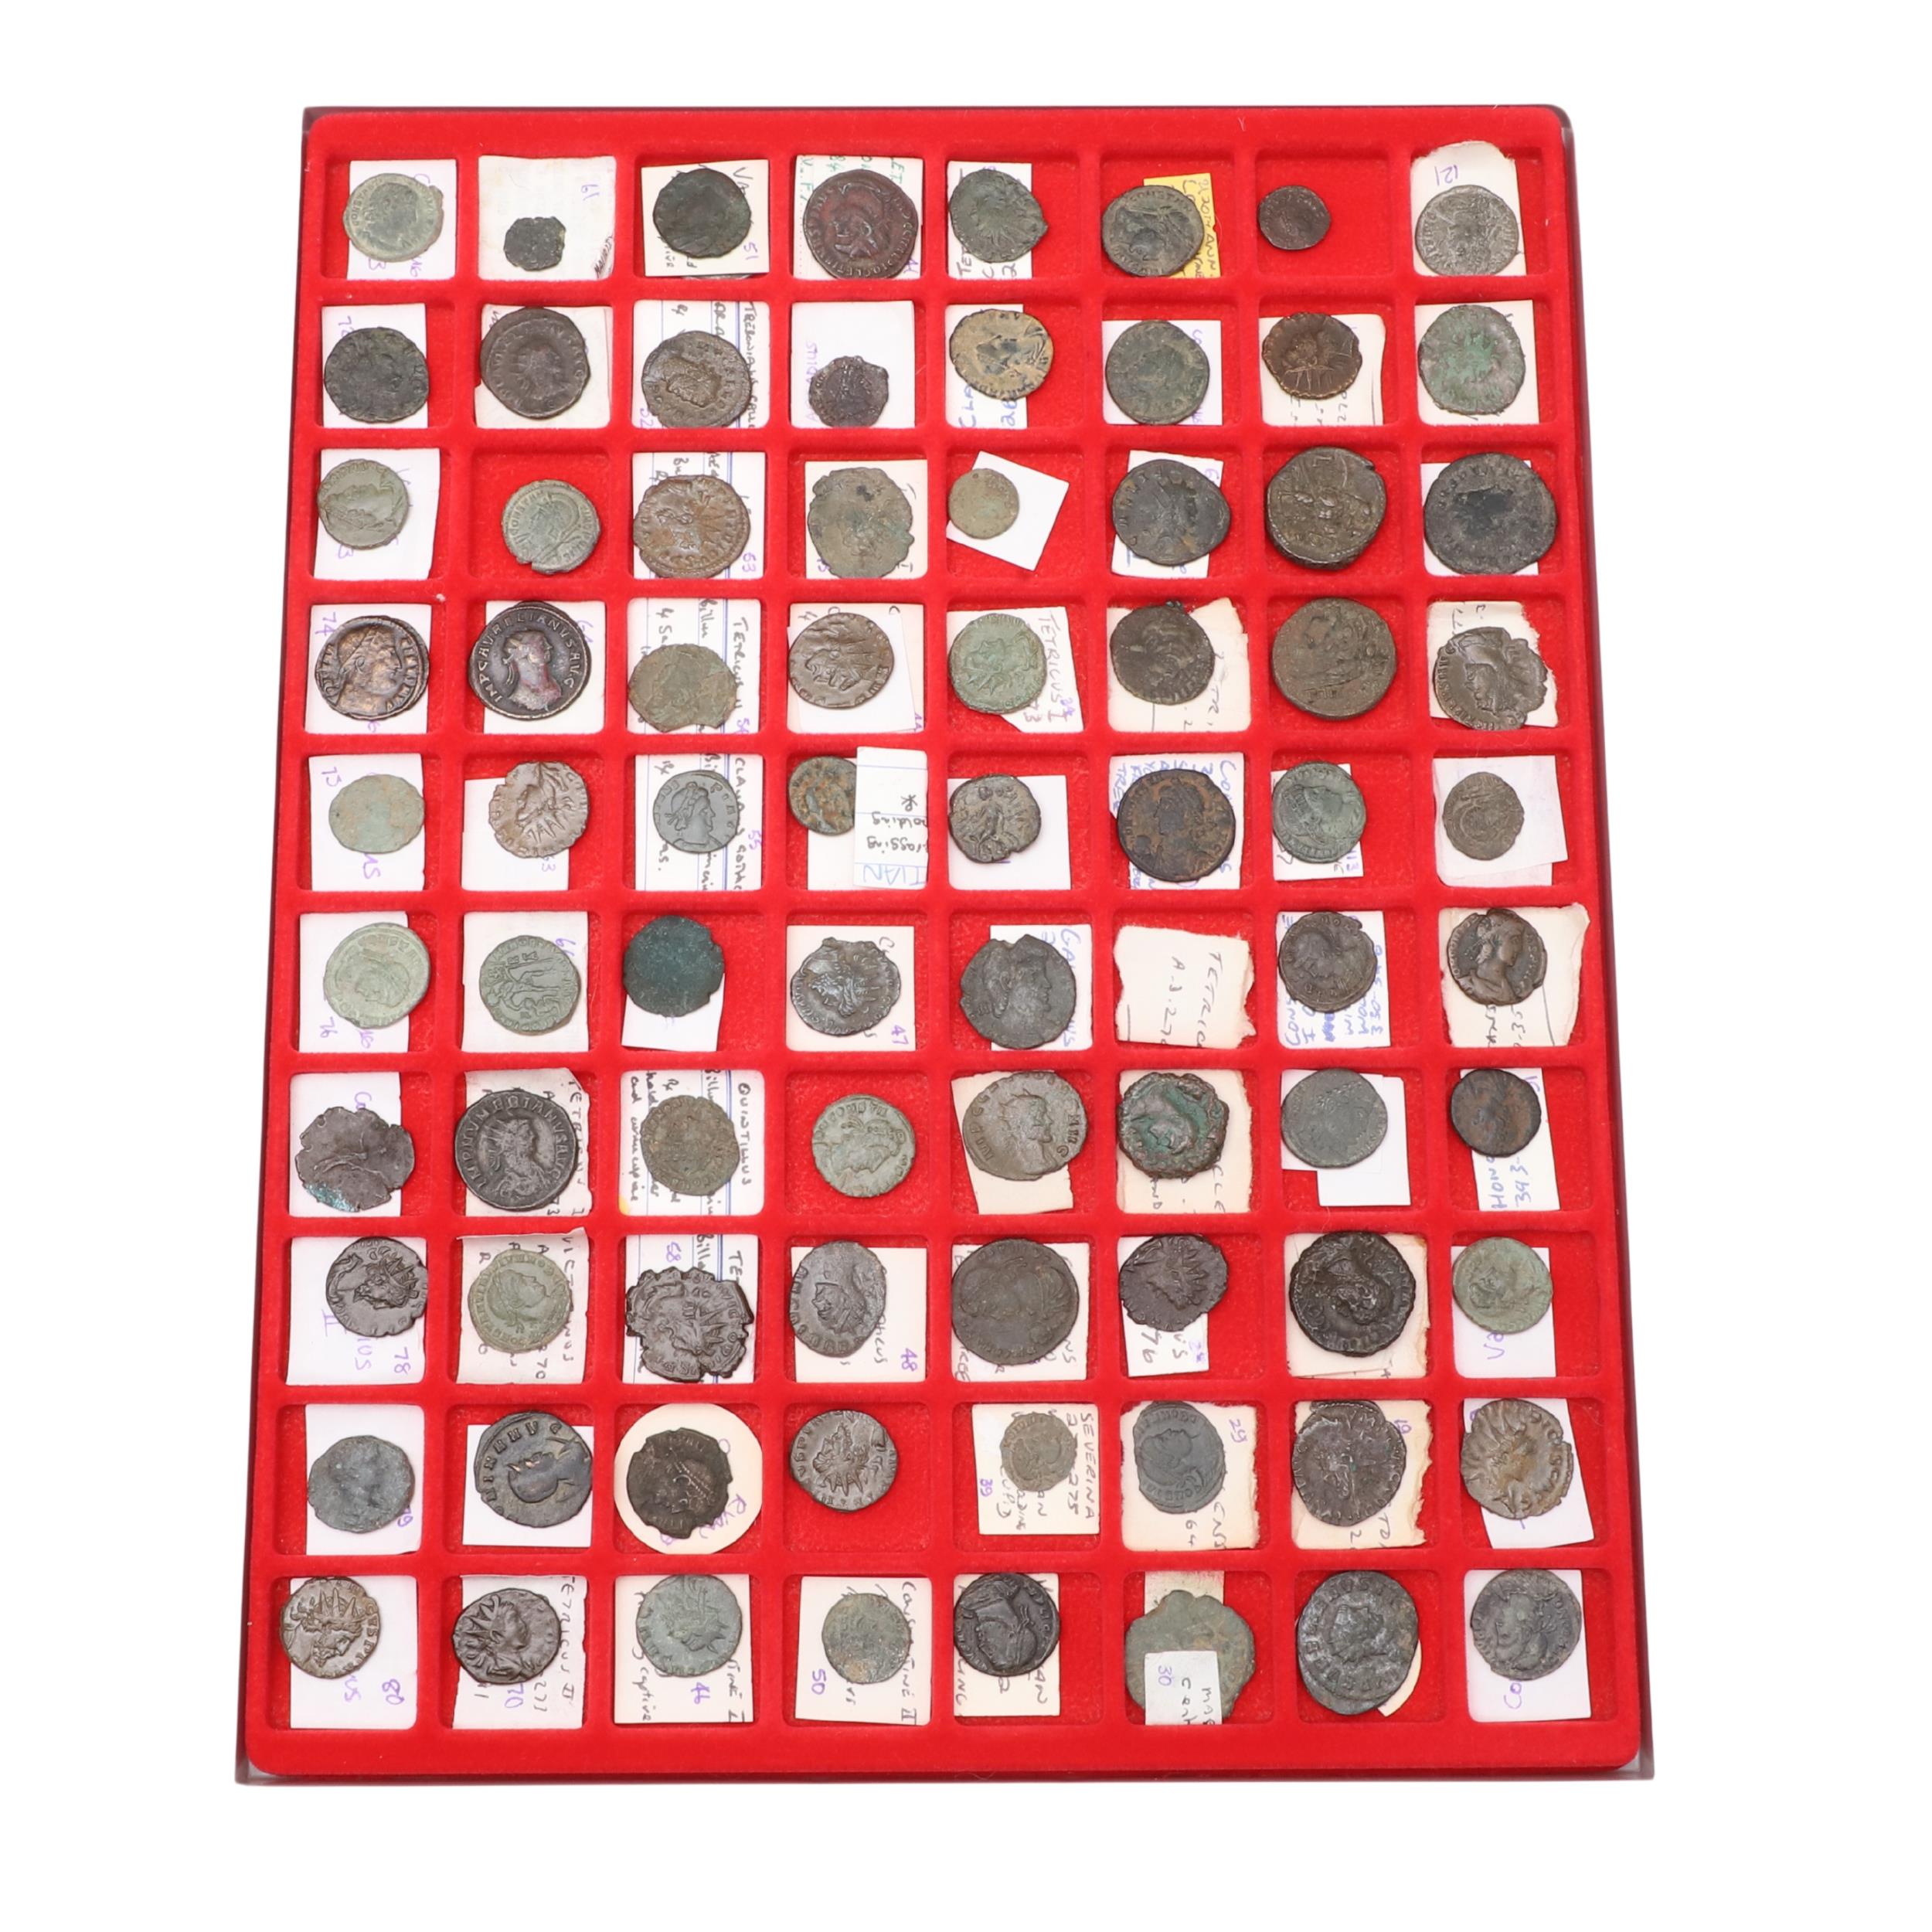 A COLLECTION OF ROMAN COINS IN A LINDNER COIN TRAY.